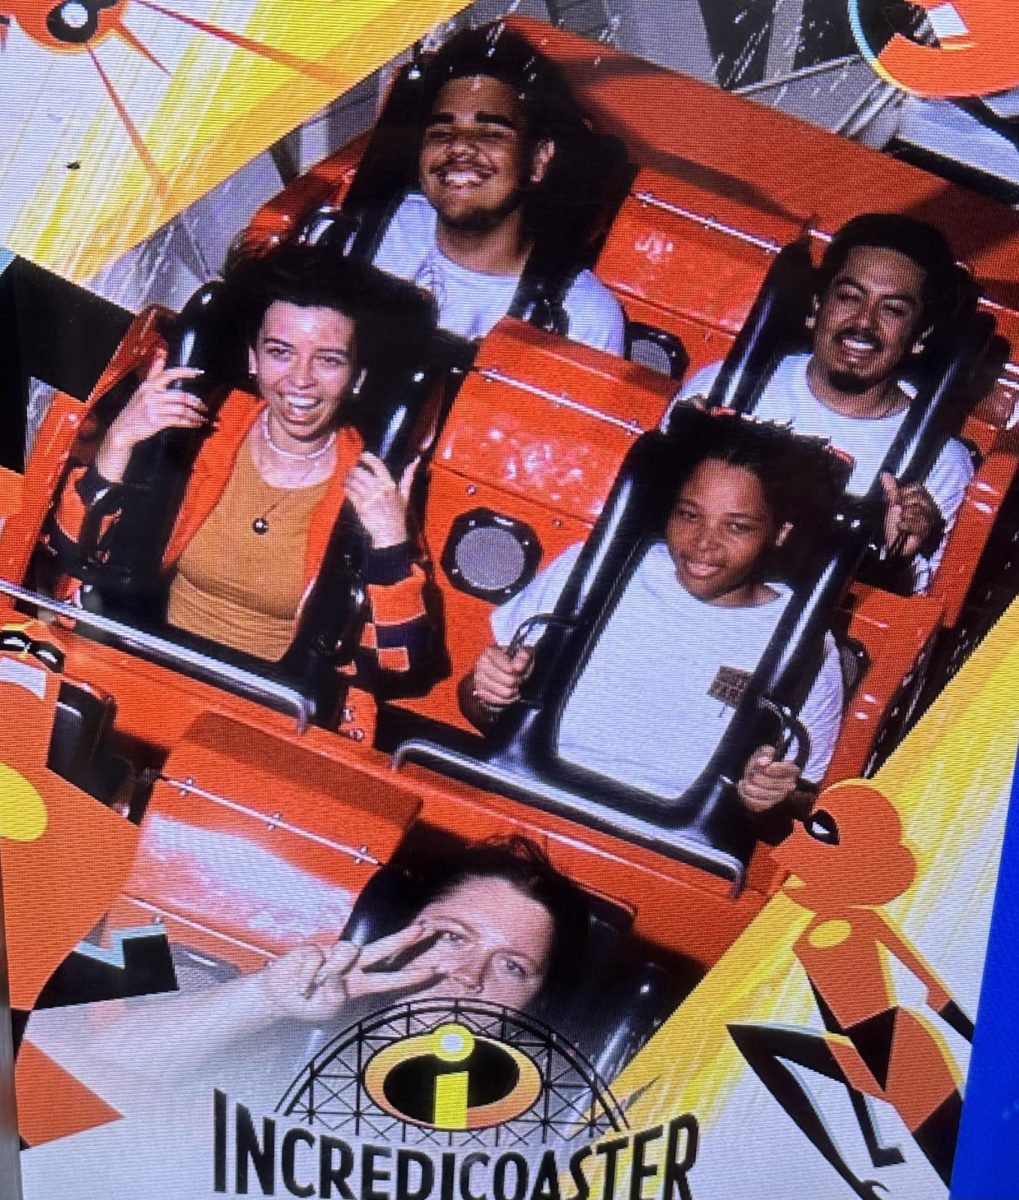 Why I Don’t Like The Incredicoaster